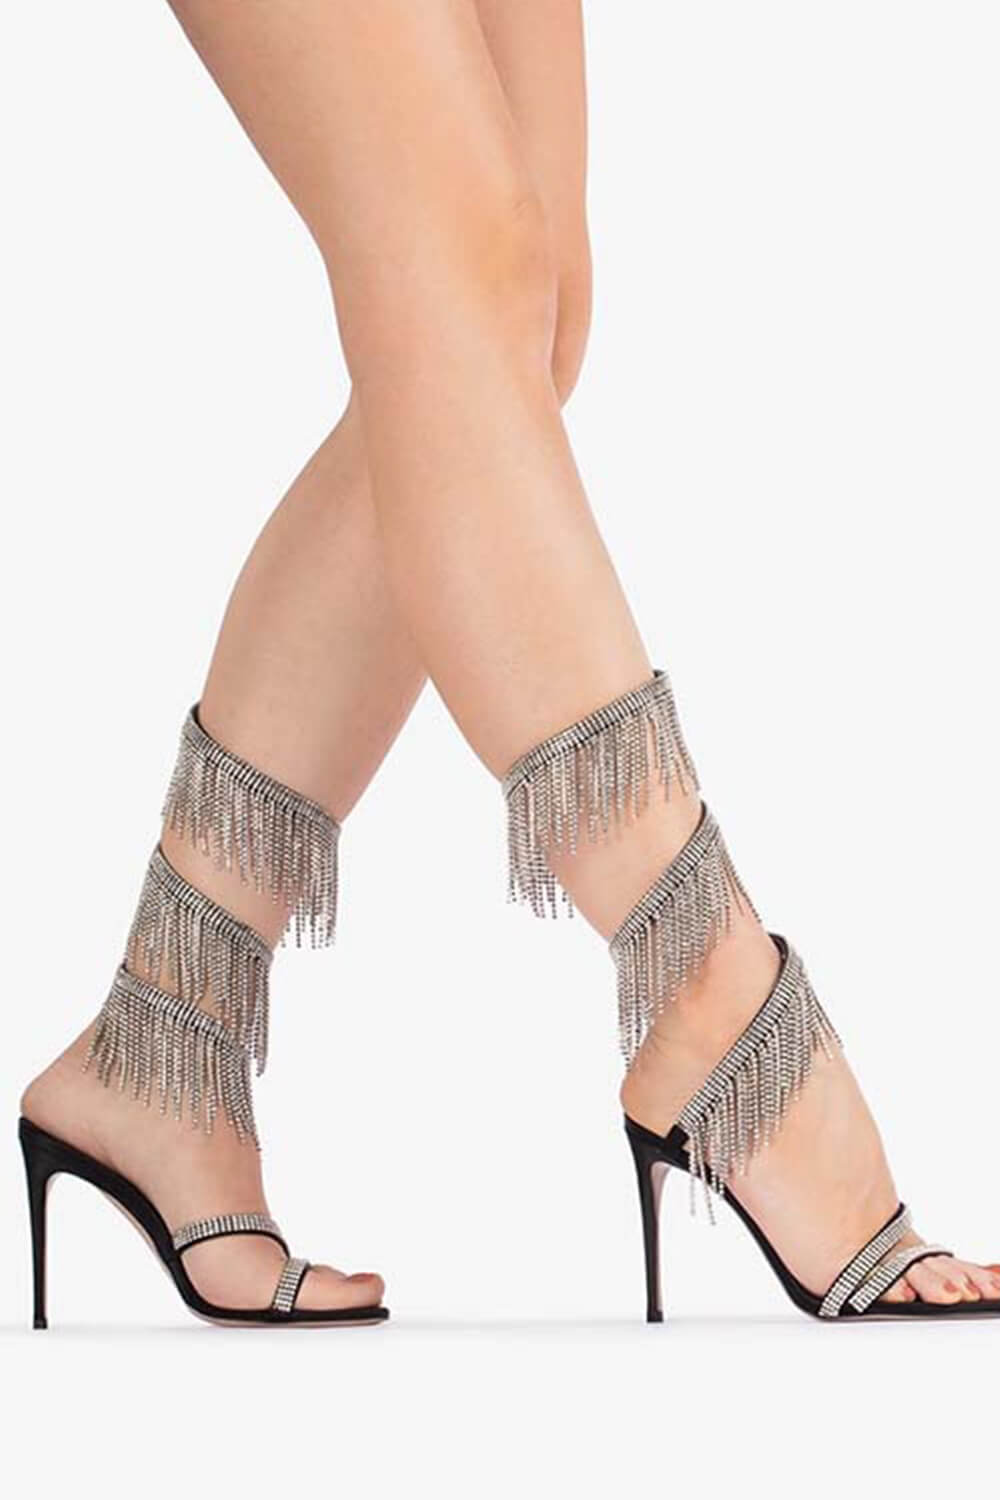 Crystal Rhinestones Fringed Open Pointed Toe Around The Ankle Coil Stiletto Heeled Sandals - Black